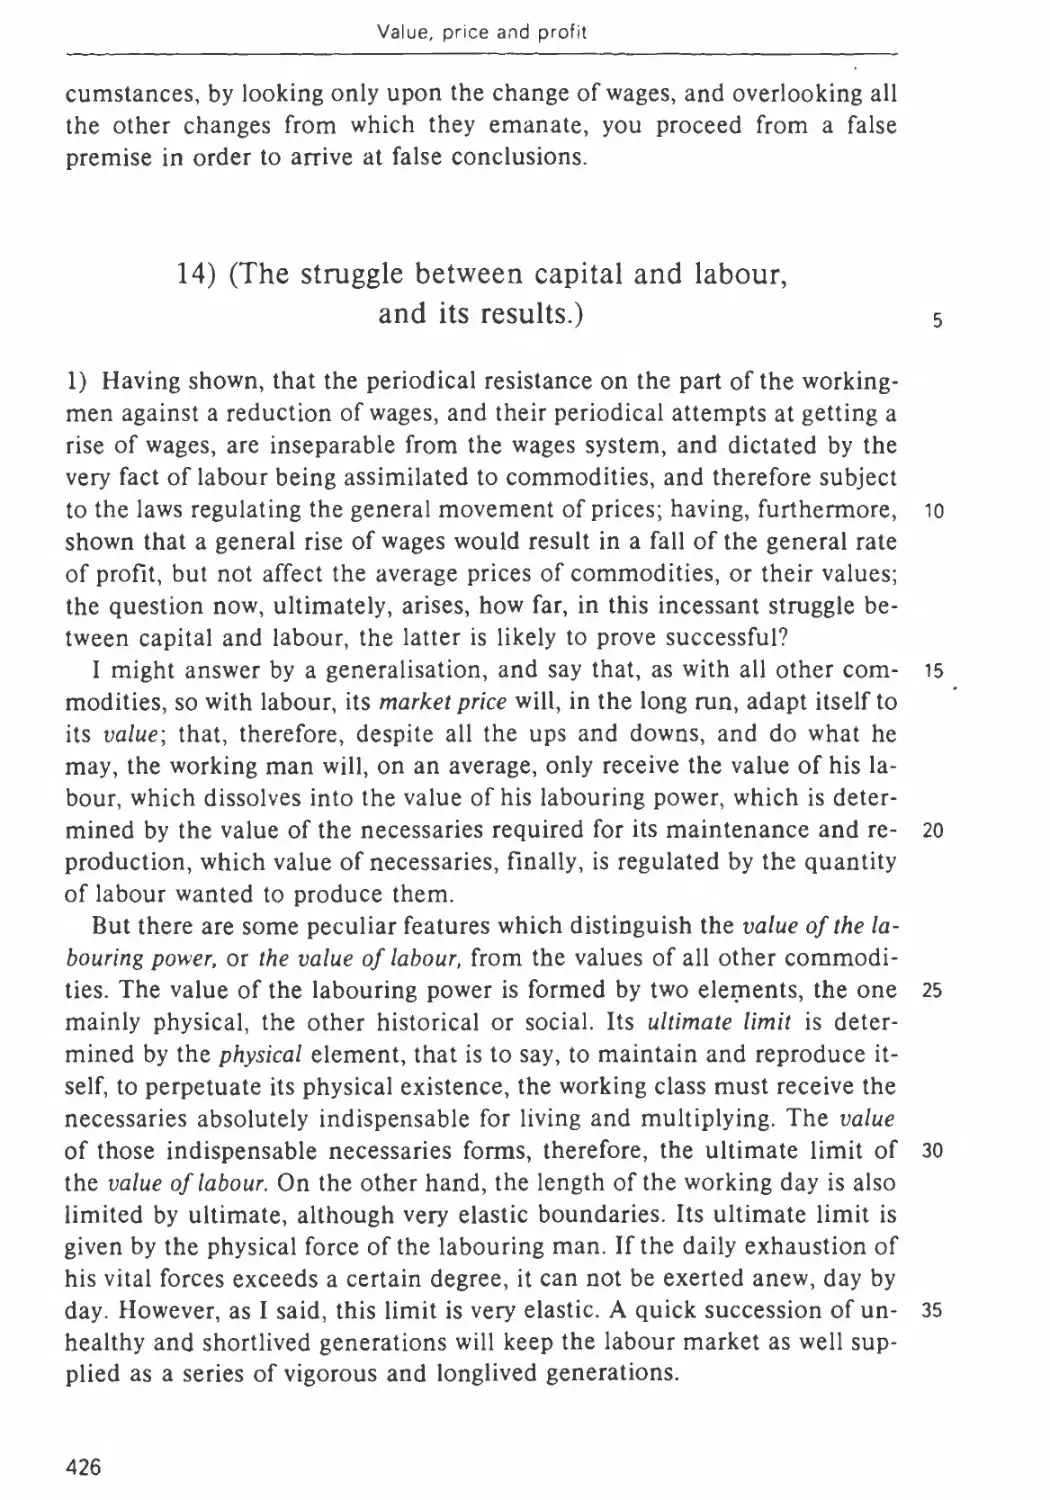 14. The struggle between capital and labour, and its results